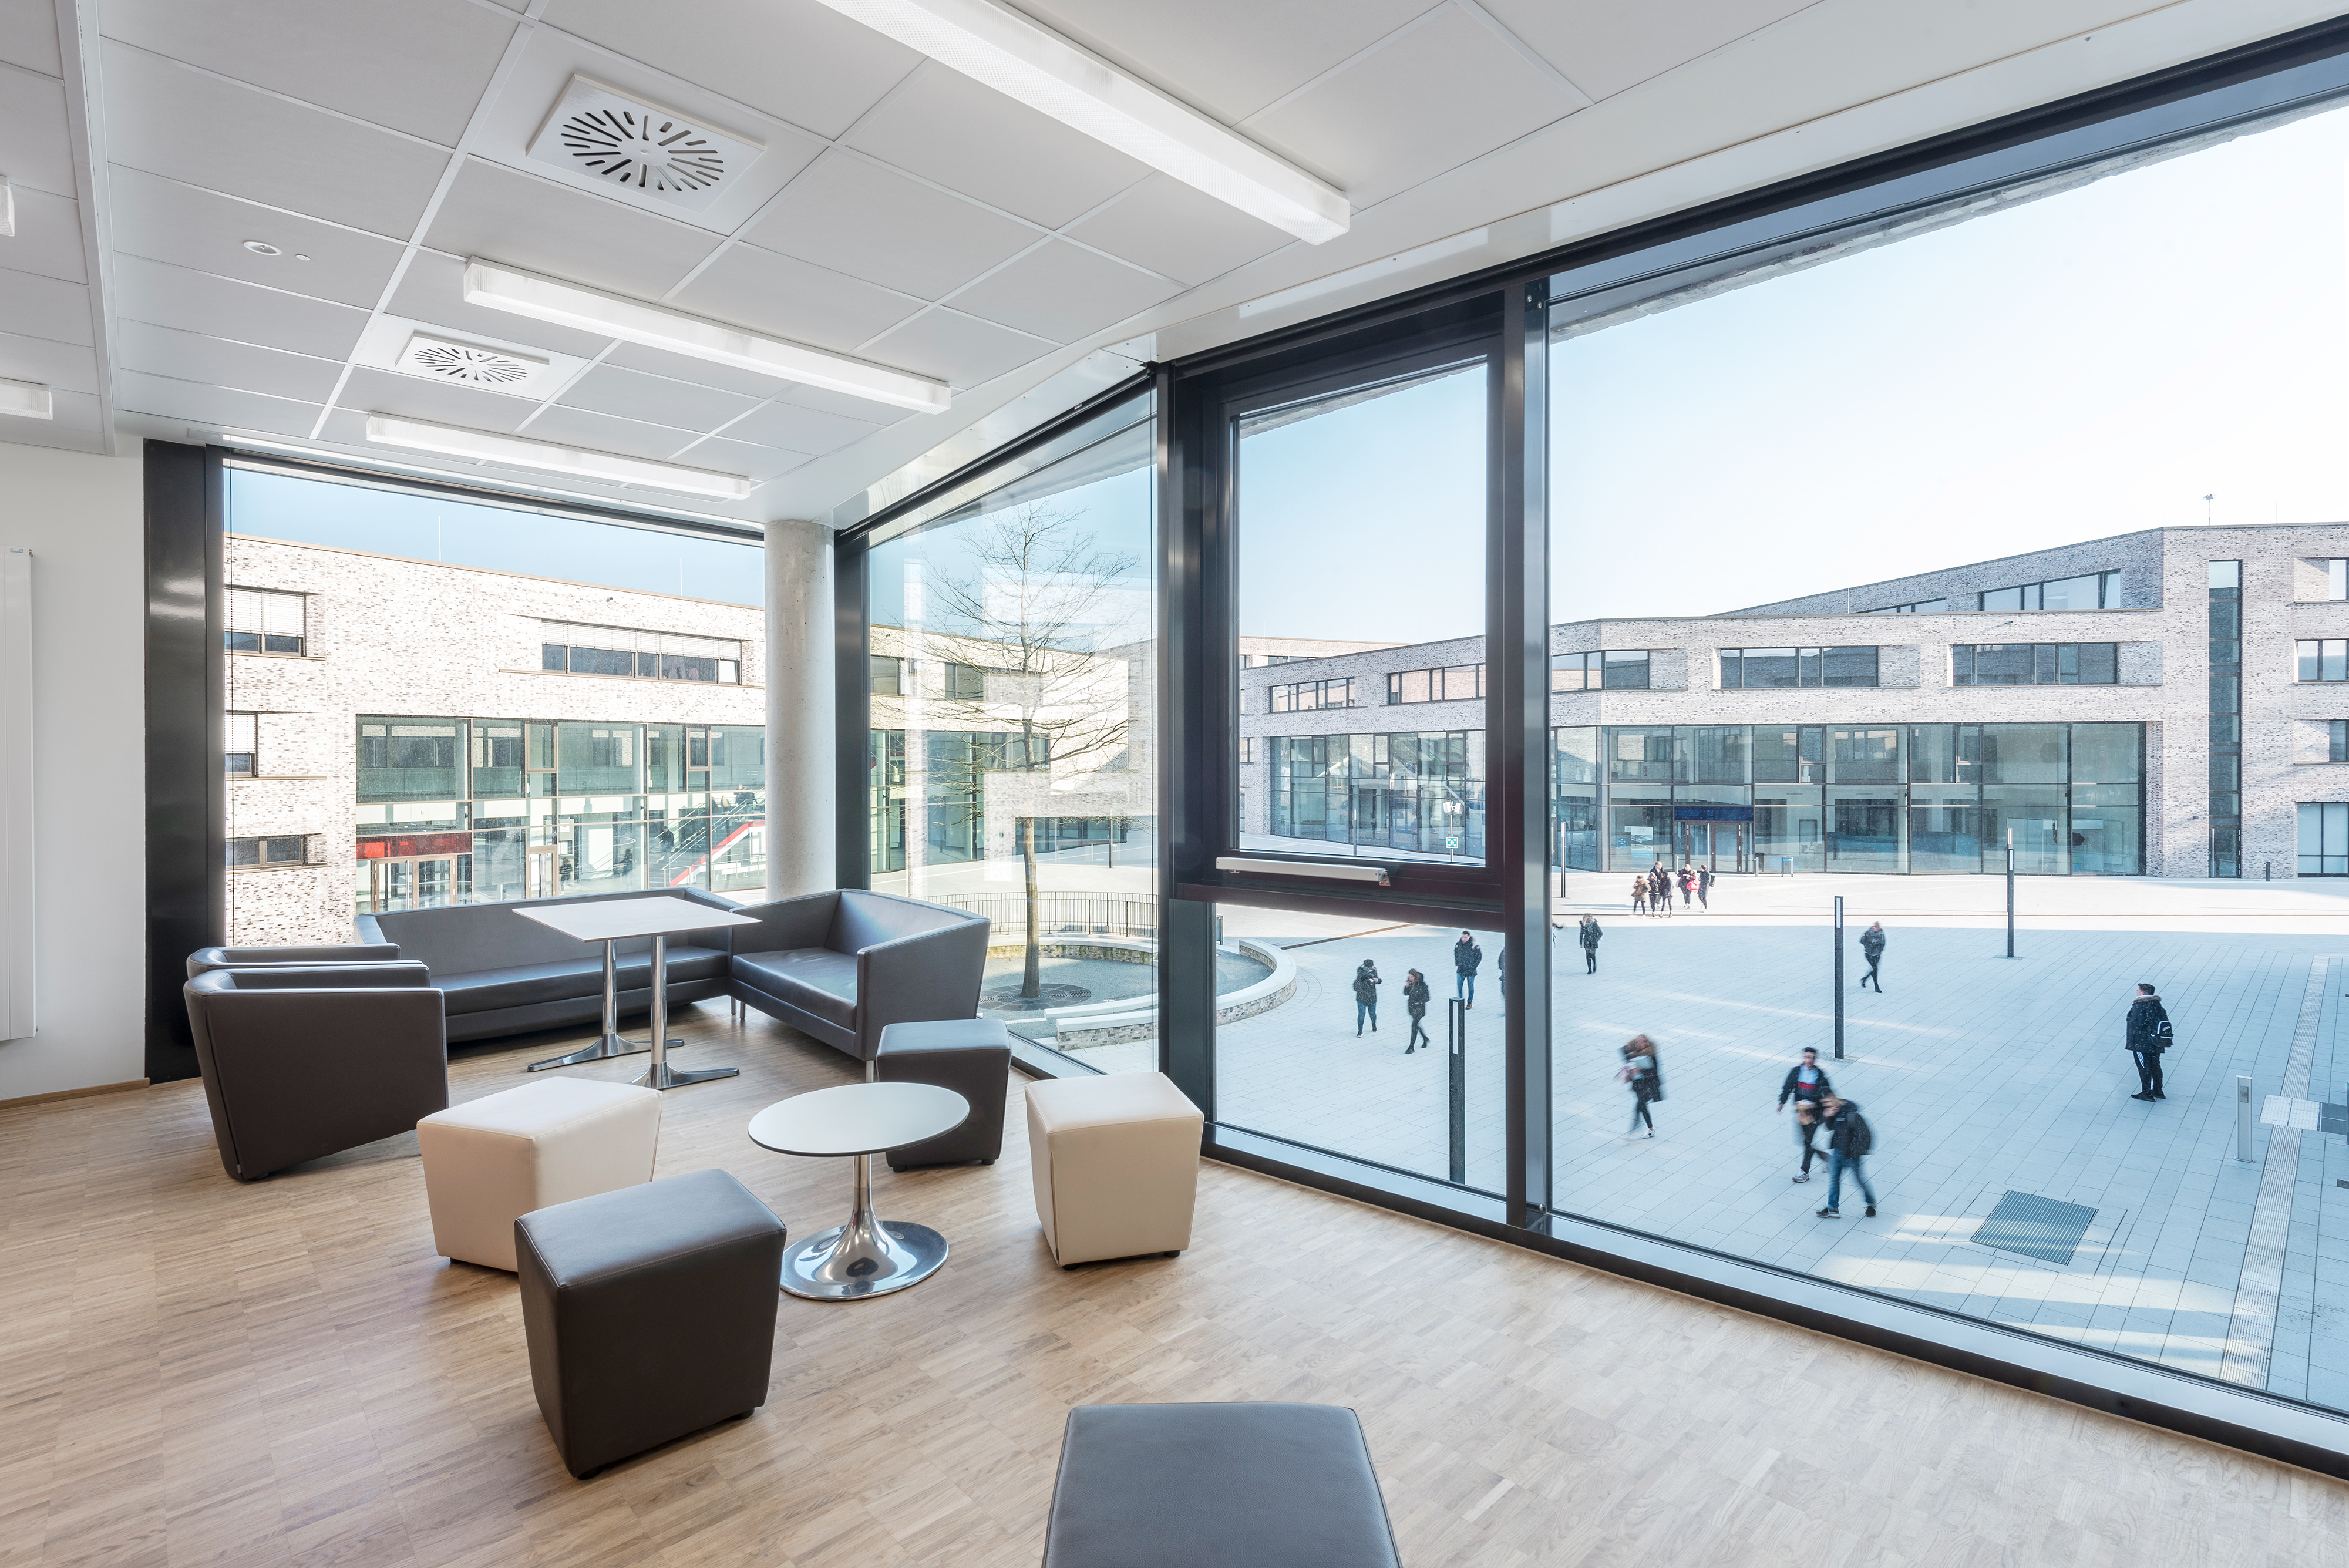 Acoustic ceilings ensure a positive learning environment